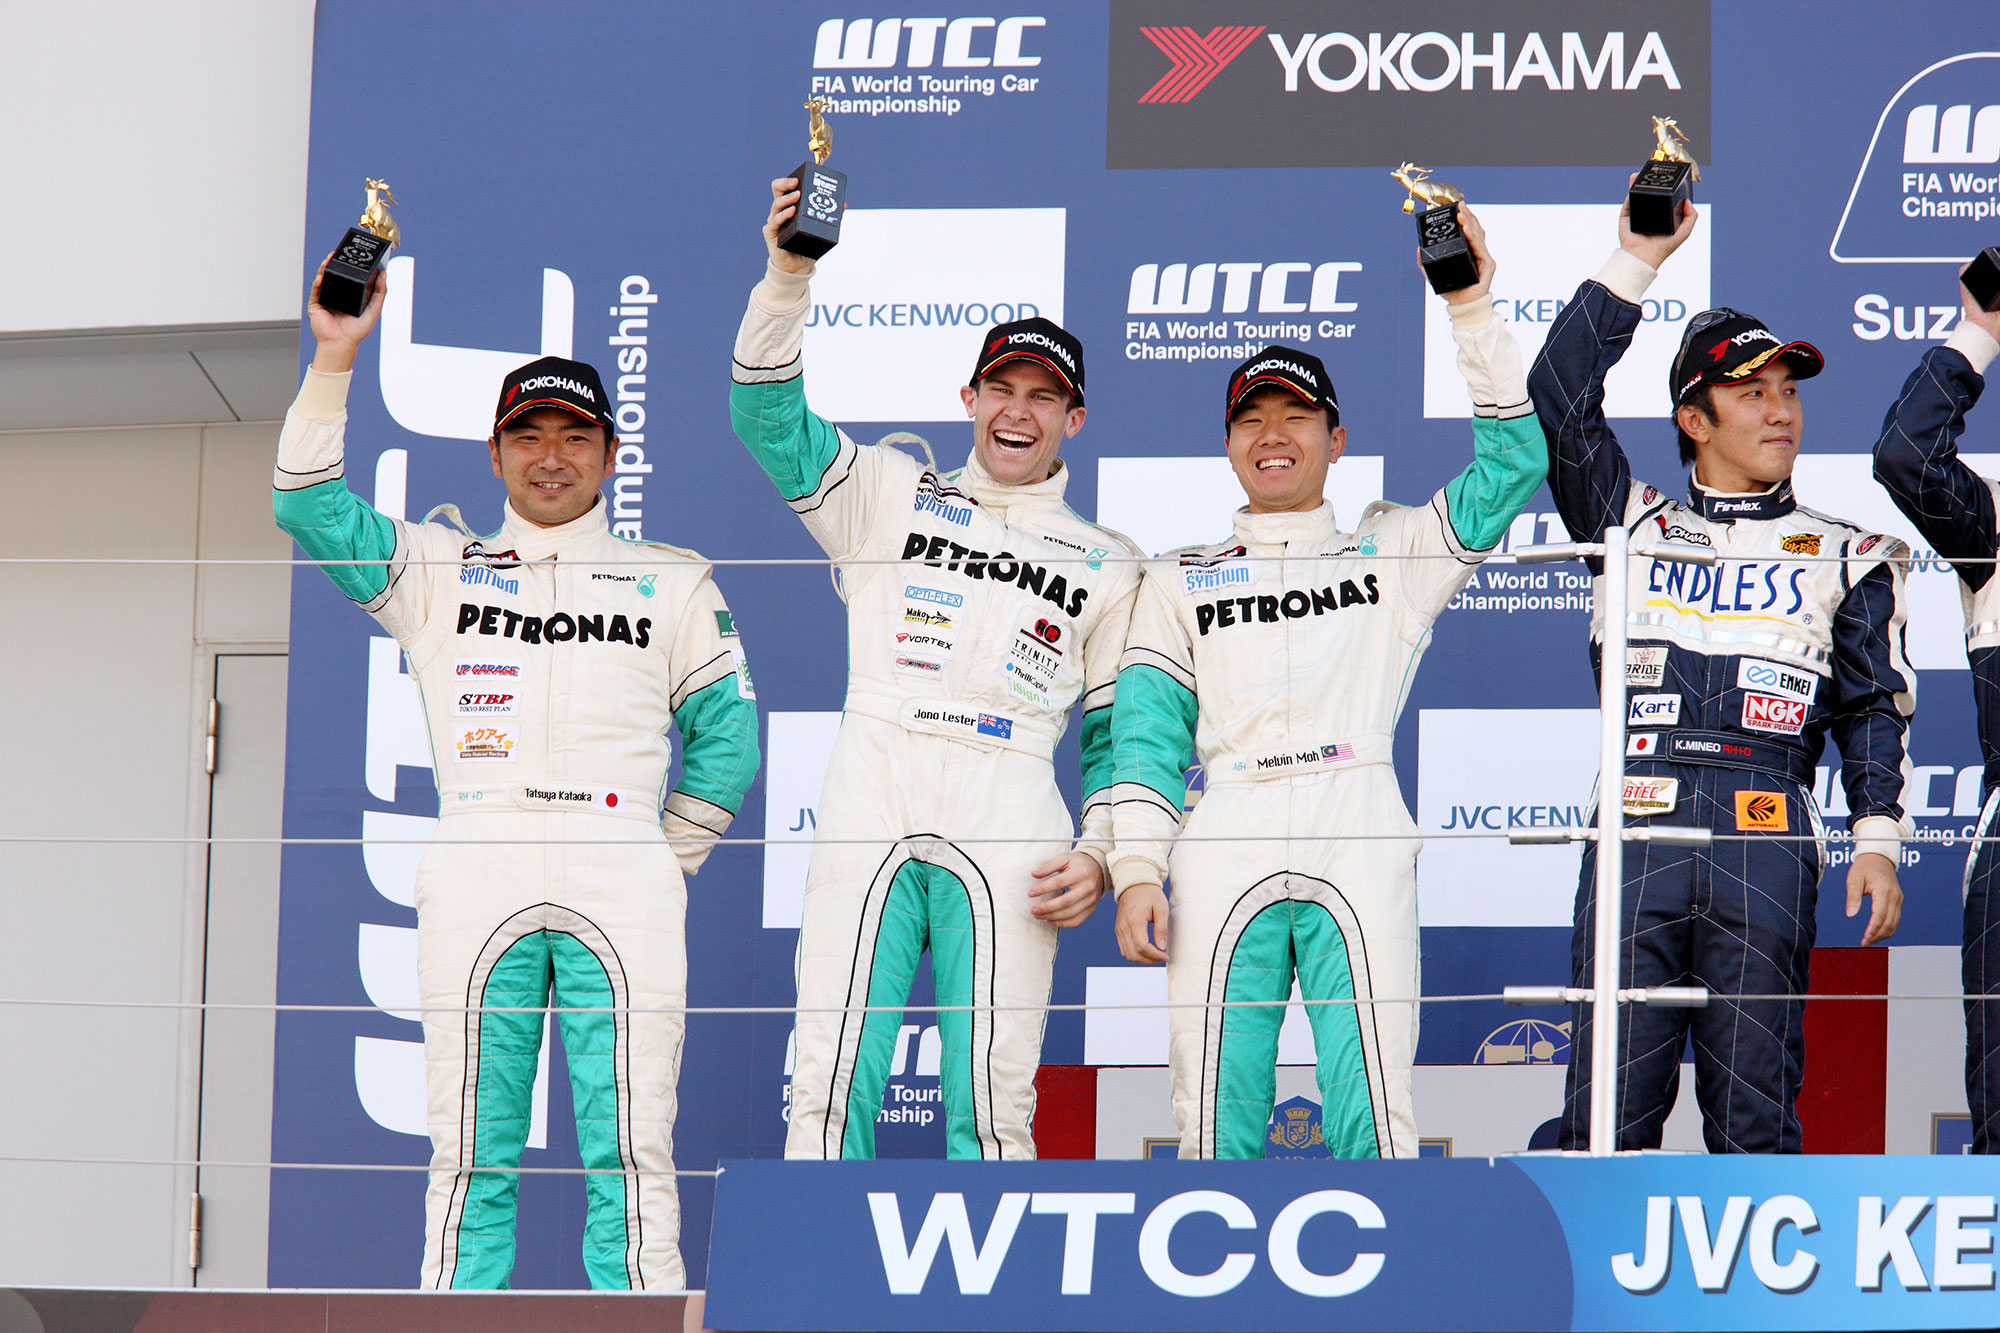 Lester takes first win in Japan